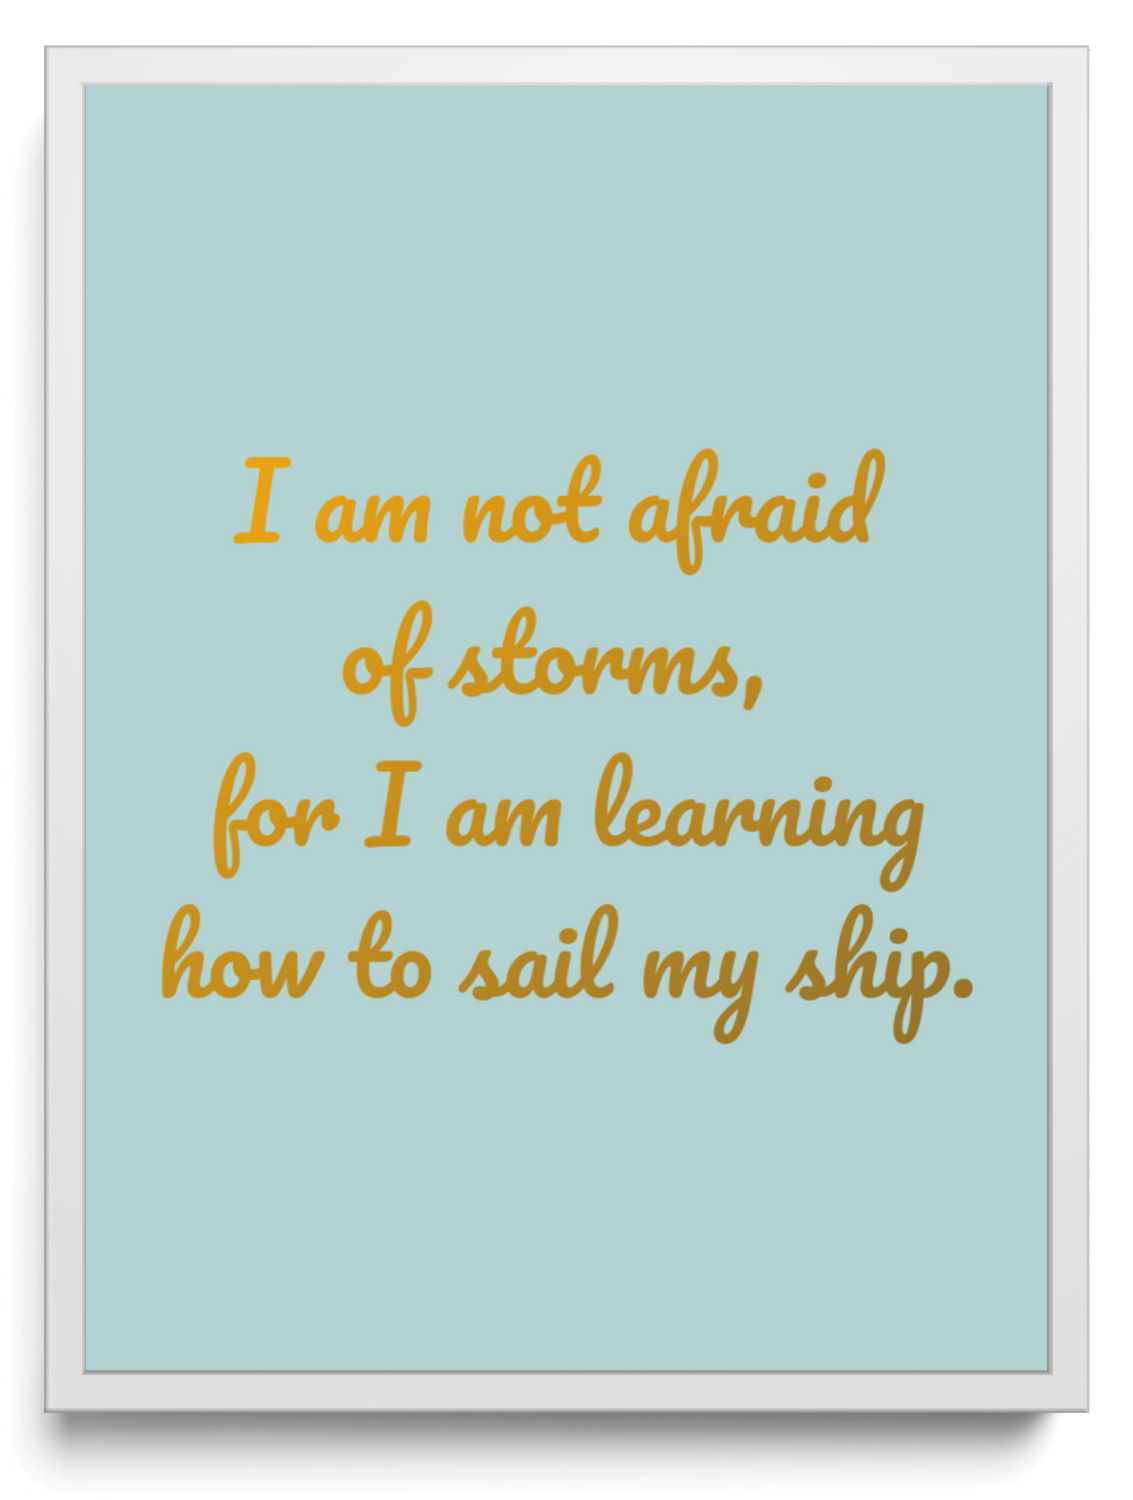 I am not afraid of storms, for I am learning how to sail my ship. framed typographic print